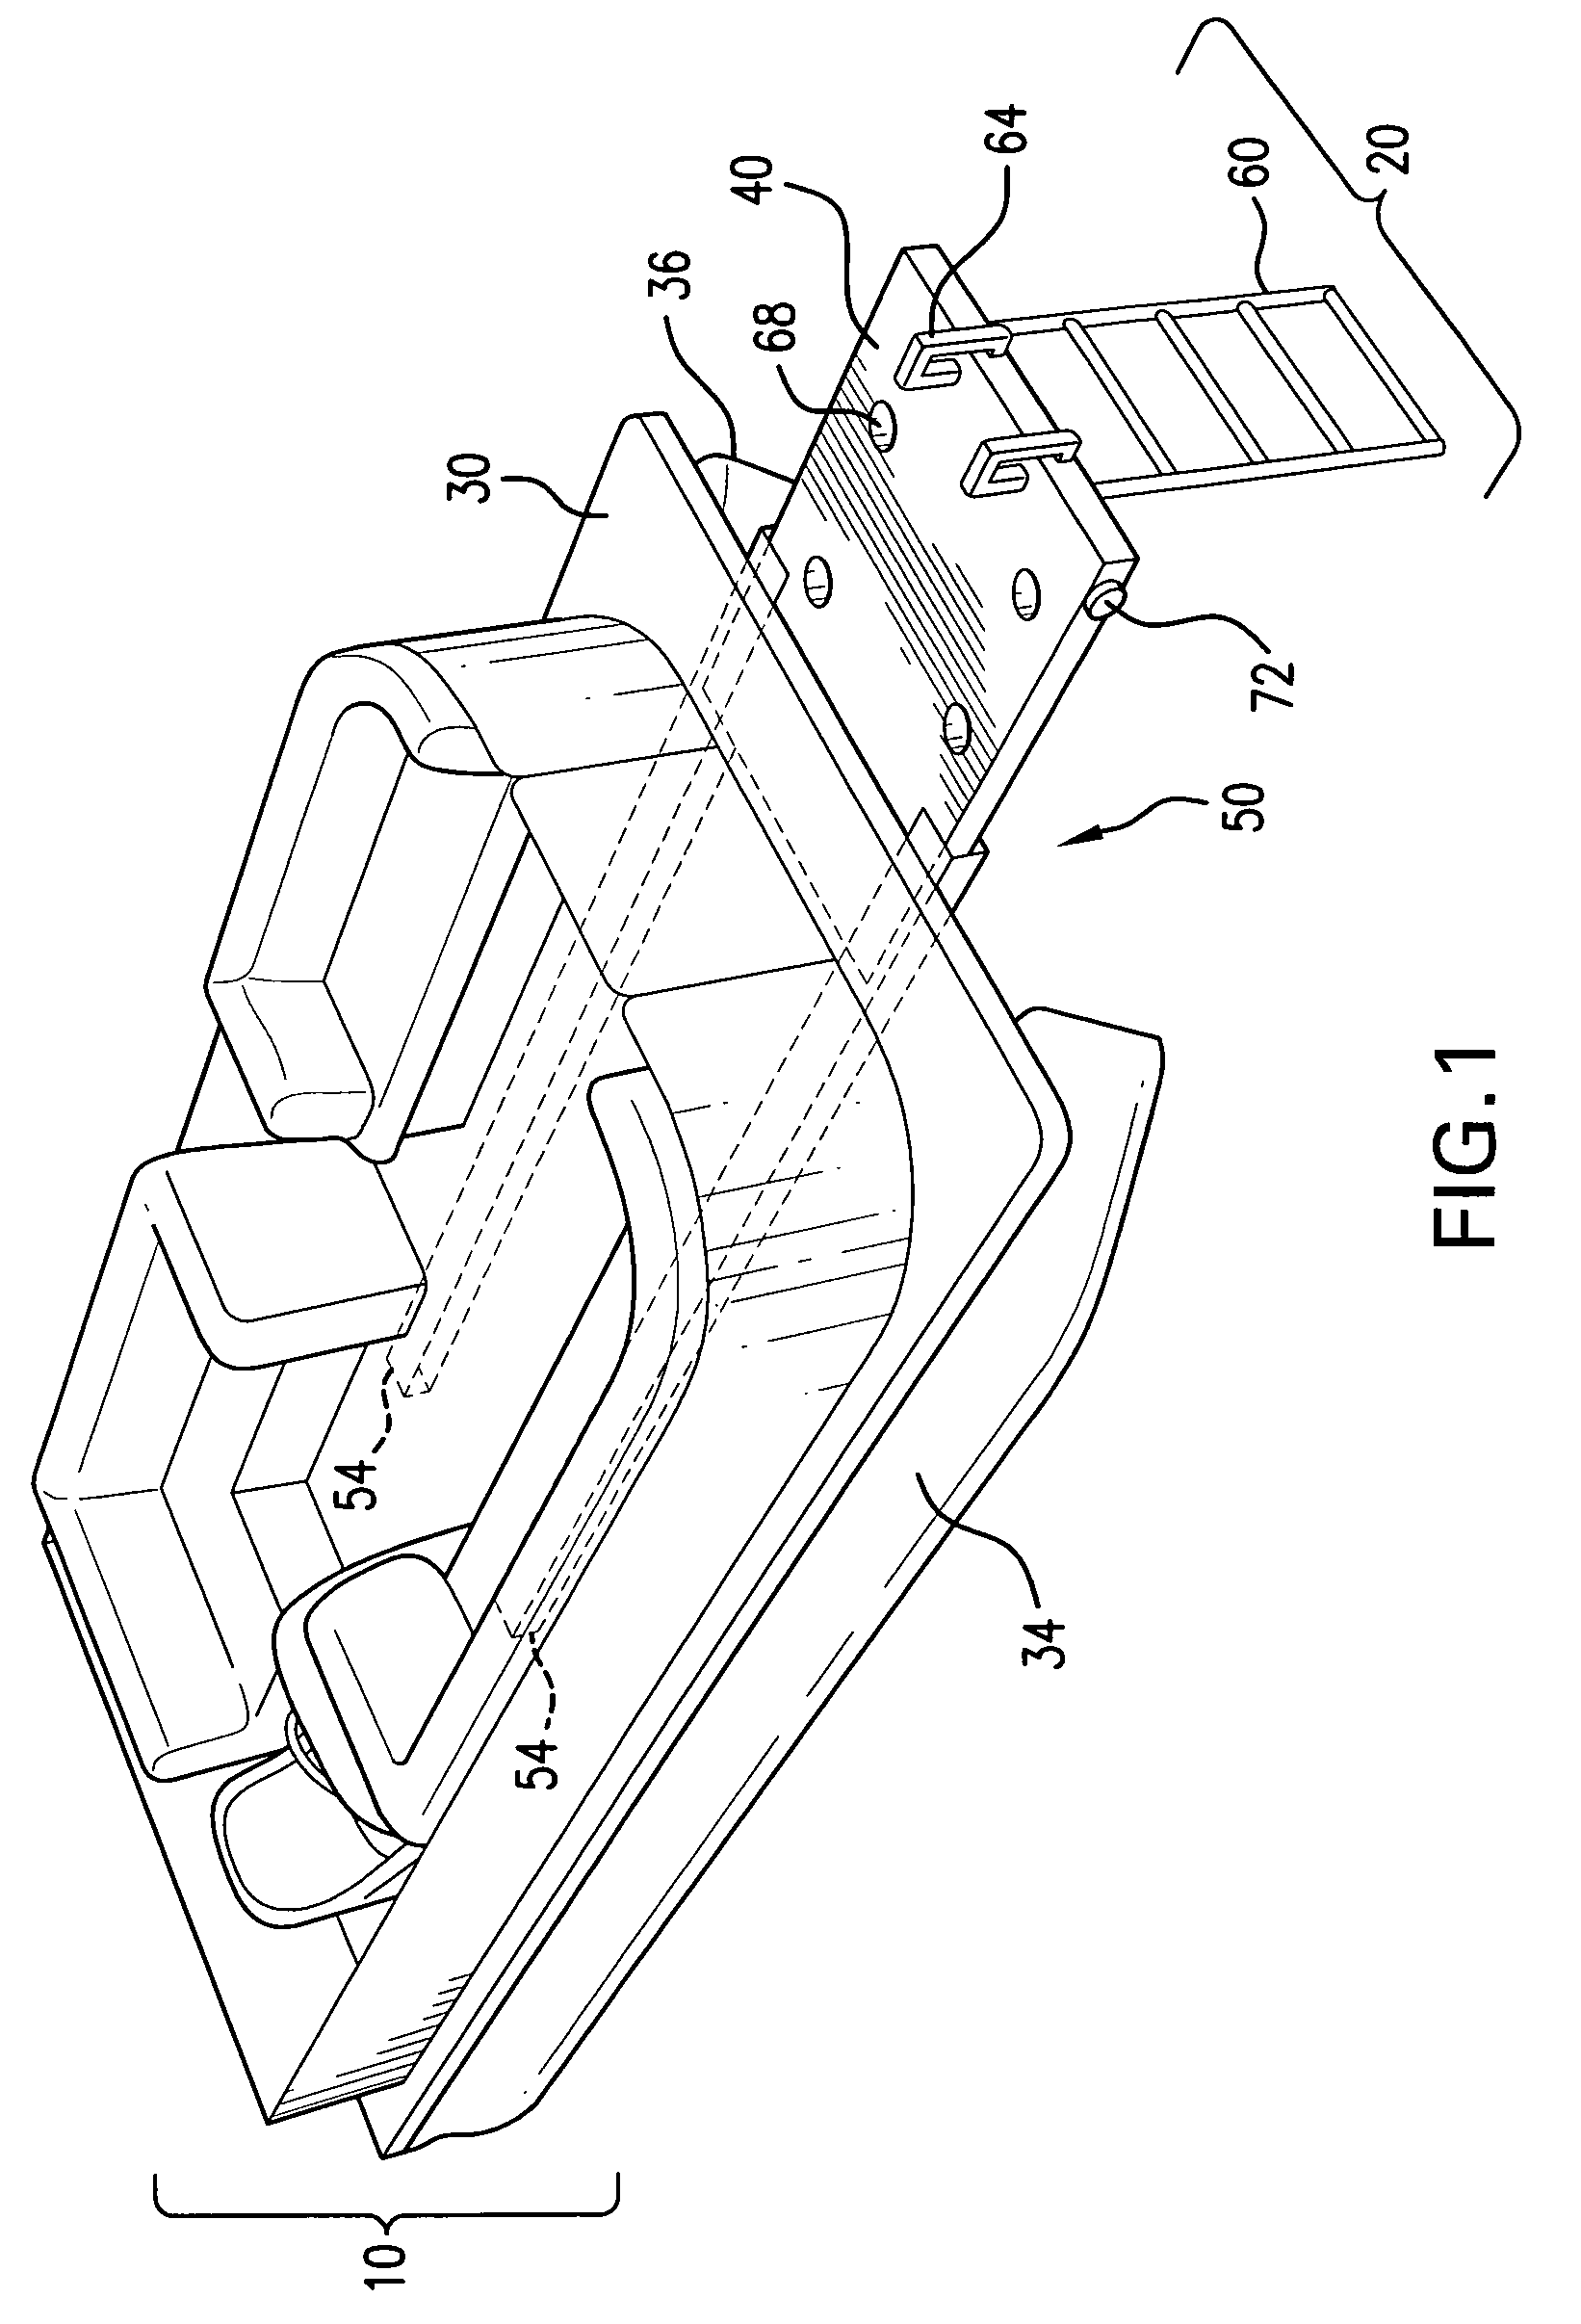 Floating deck apparatus for a pontoon boat